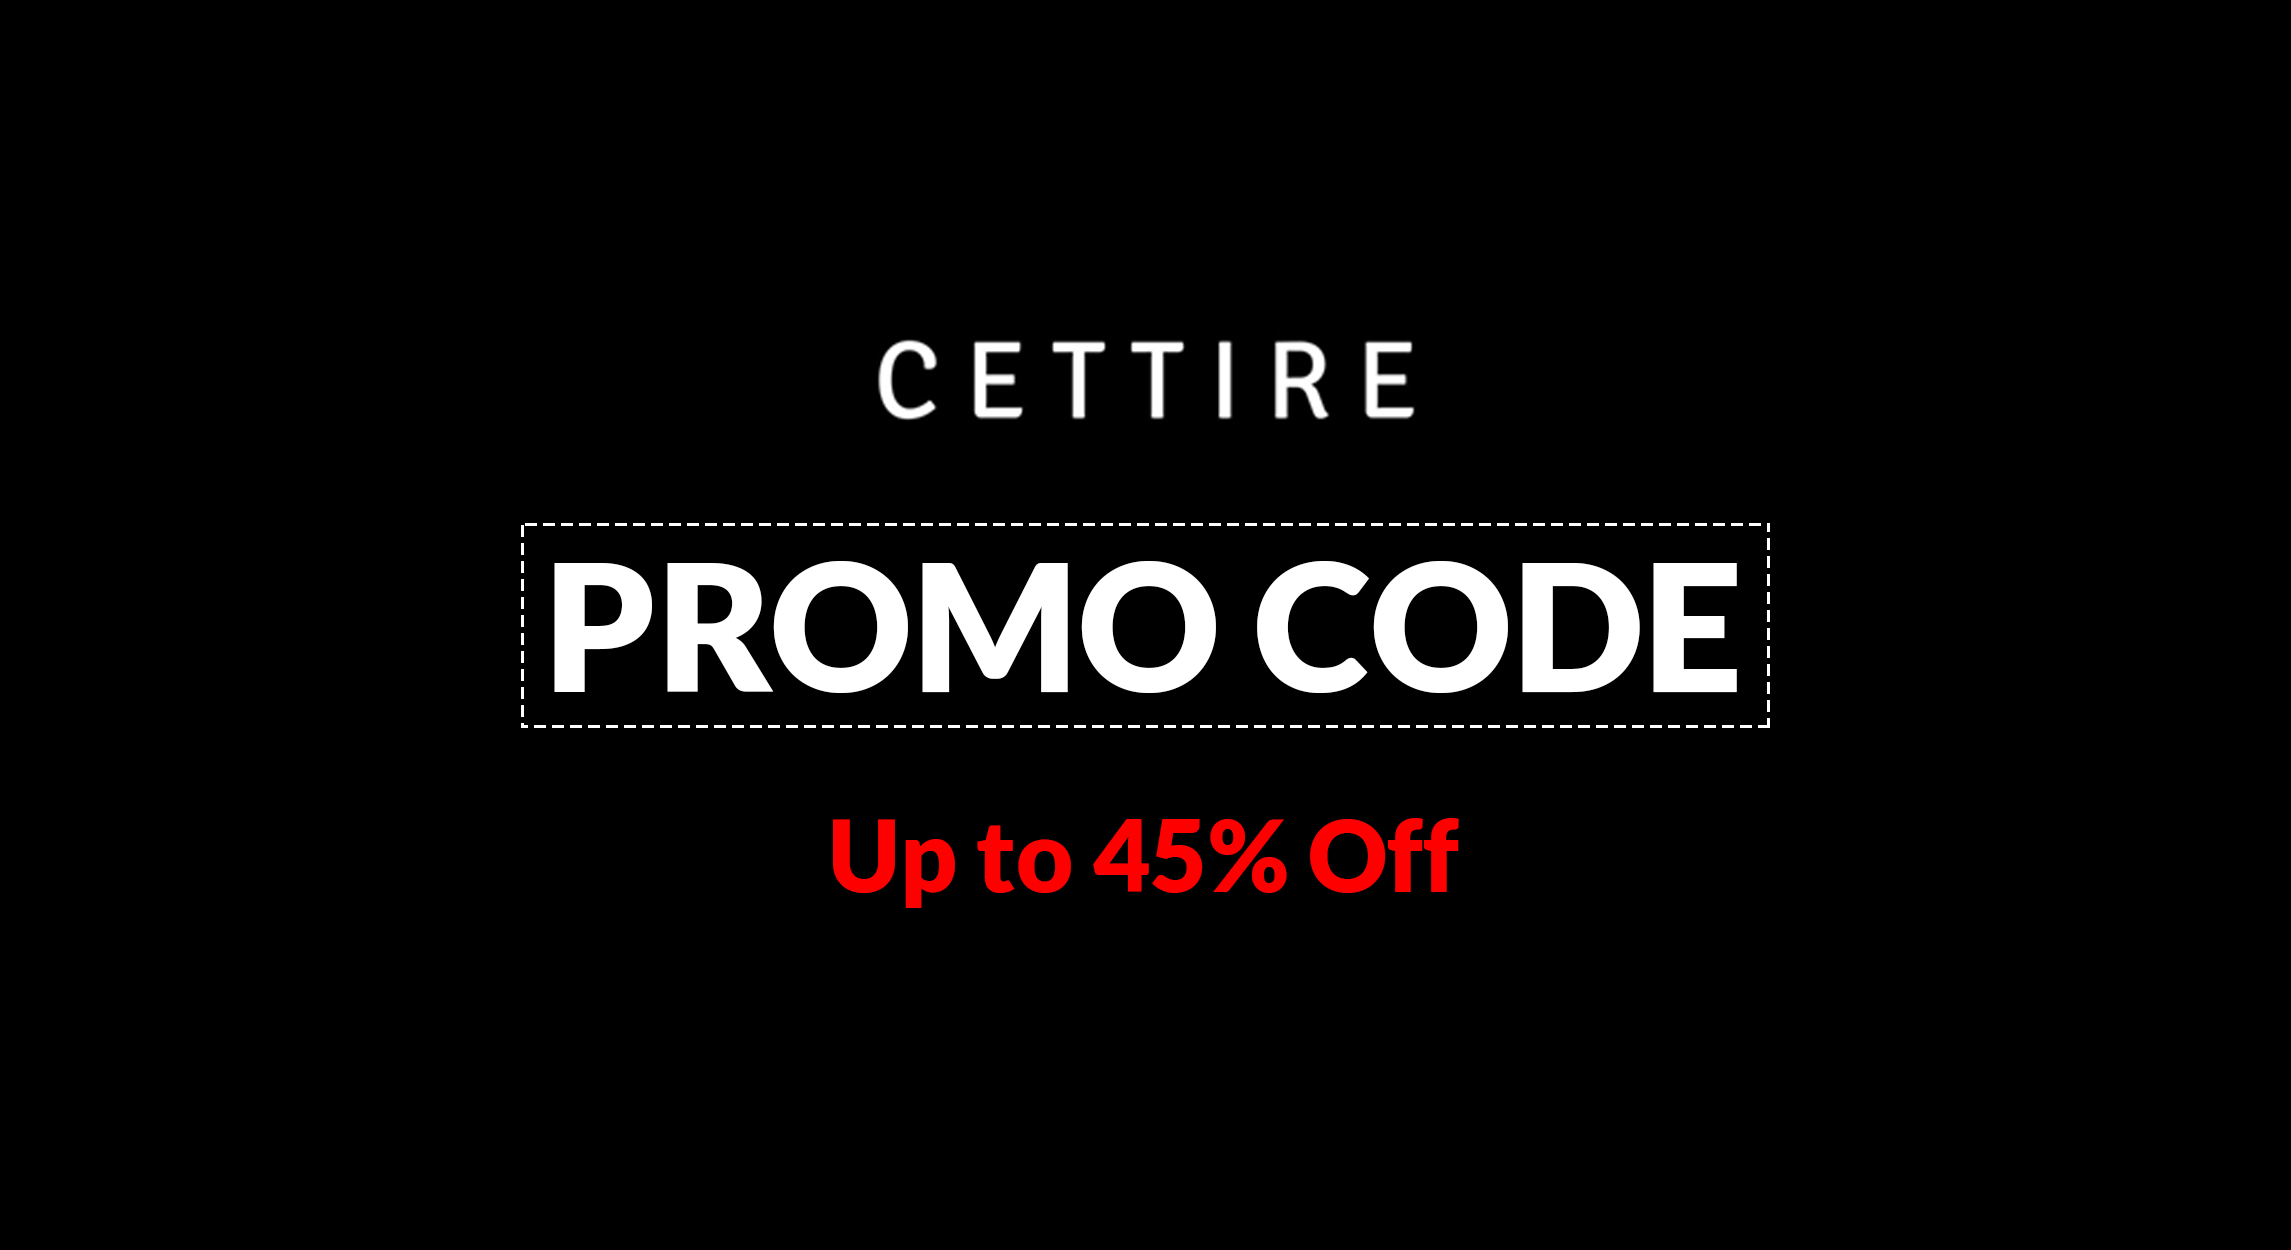 Cettire promo code up to 45 off